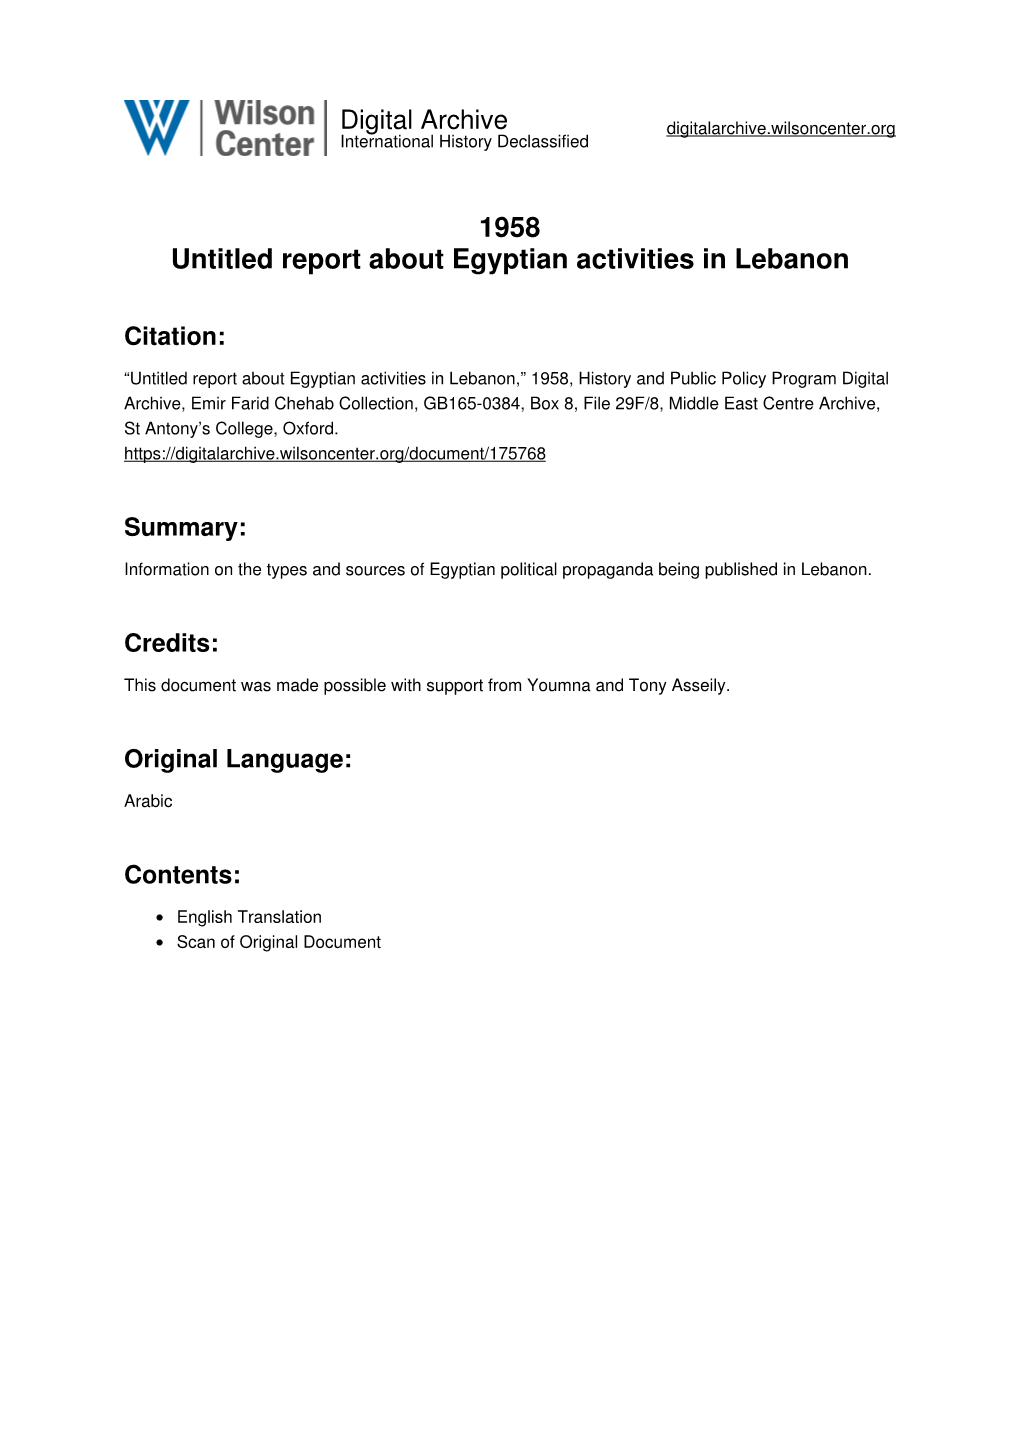 1958 Untitled Report About Egyptian Activities in Lebanon